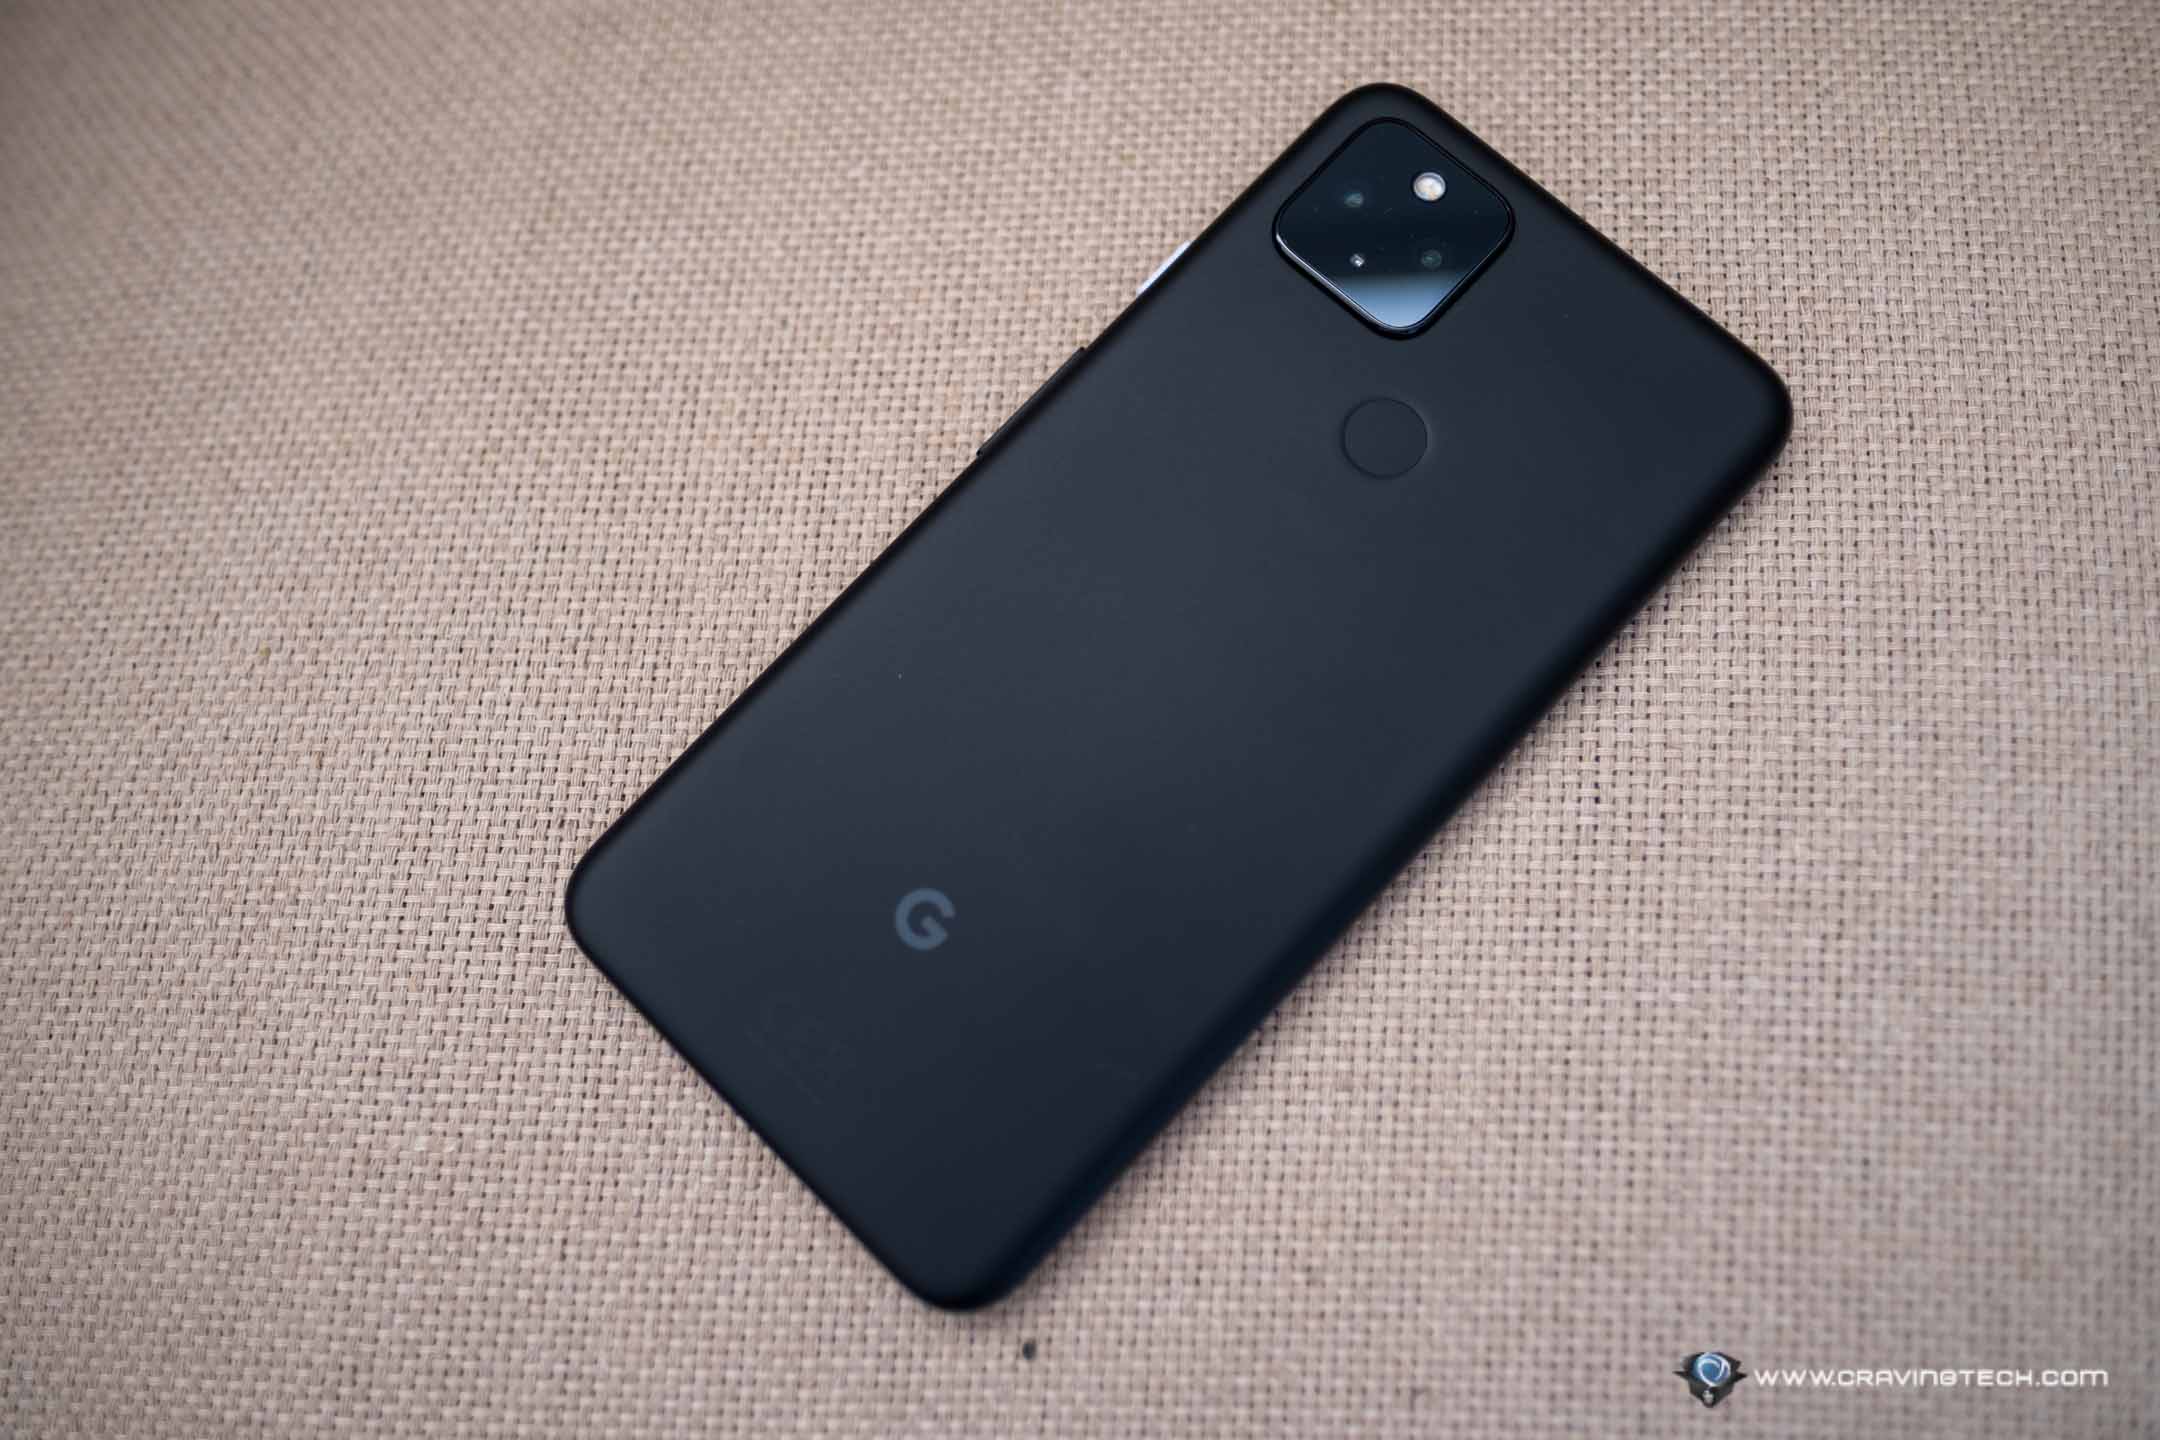 Should you grab a Google Pixel 4a with 5G?